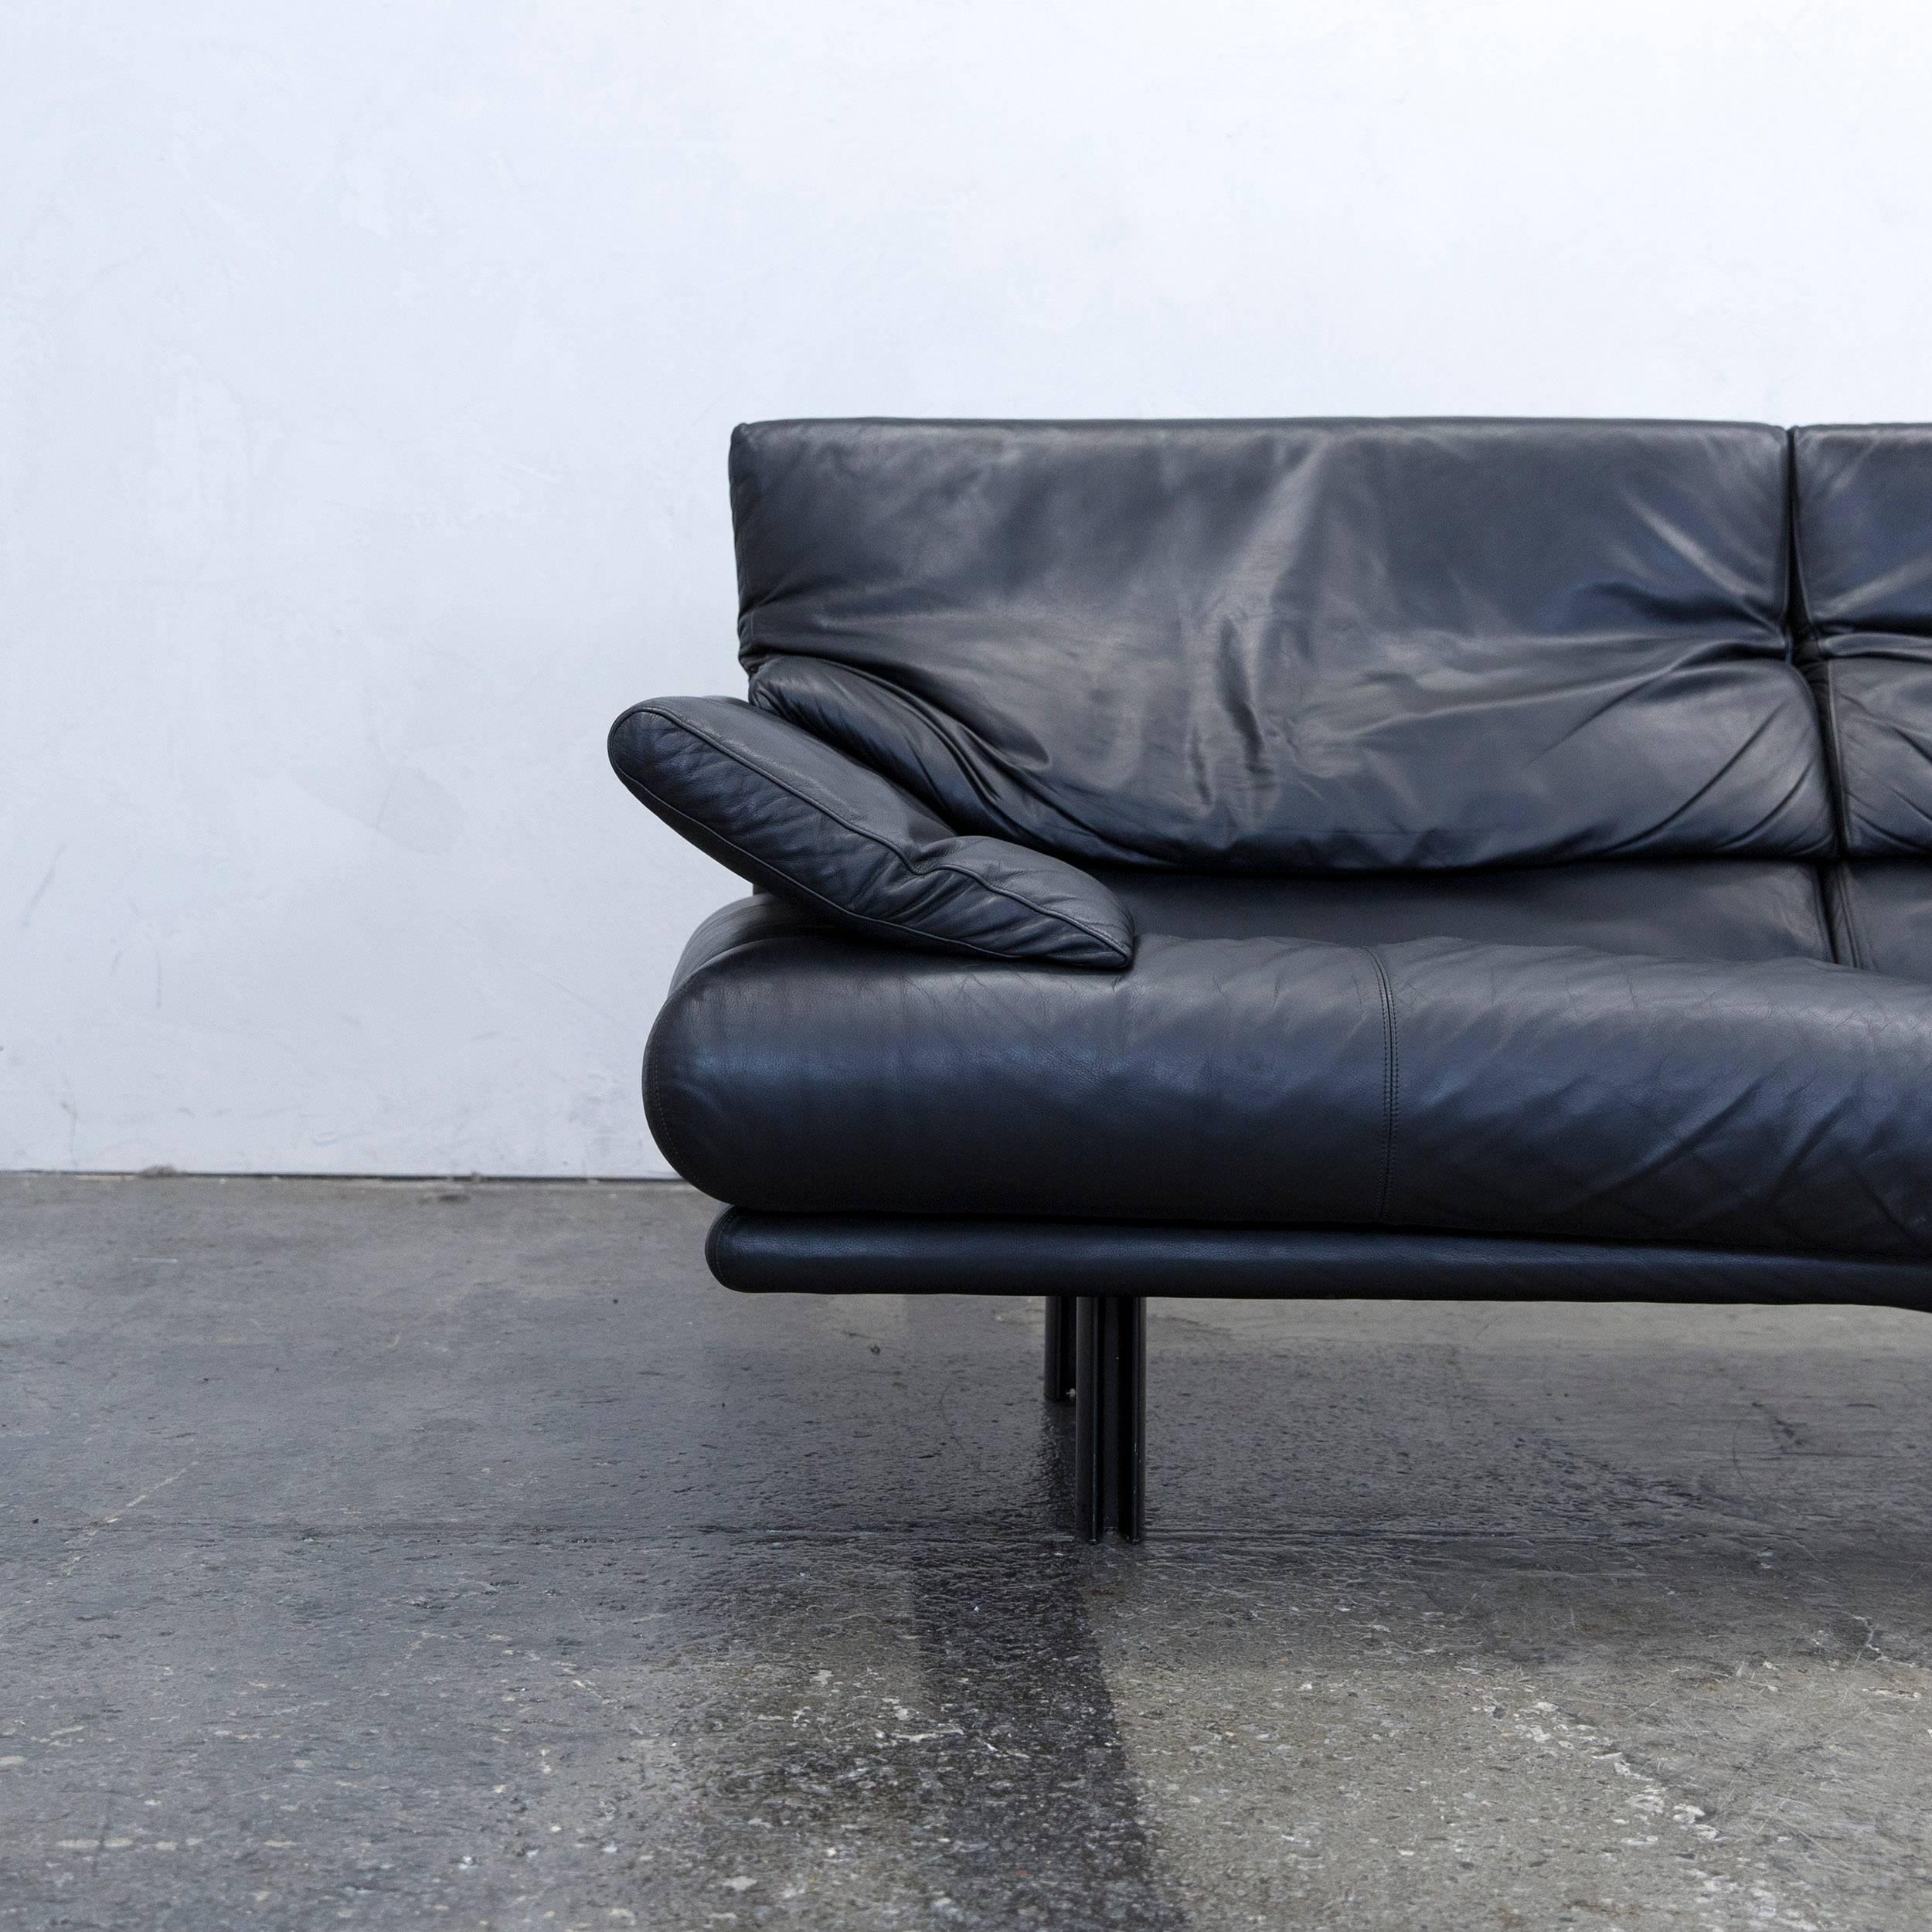 Black colored original B&B Italia Alanda designer leather sofa, in a minimalistic and modern design, with convenient functions, made for pure comfort and flexibility.